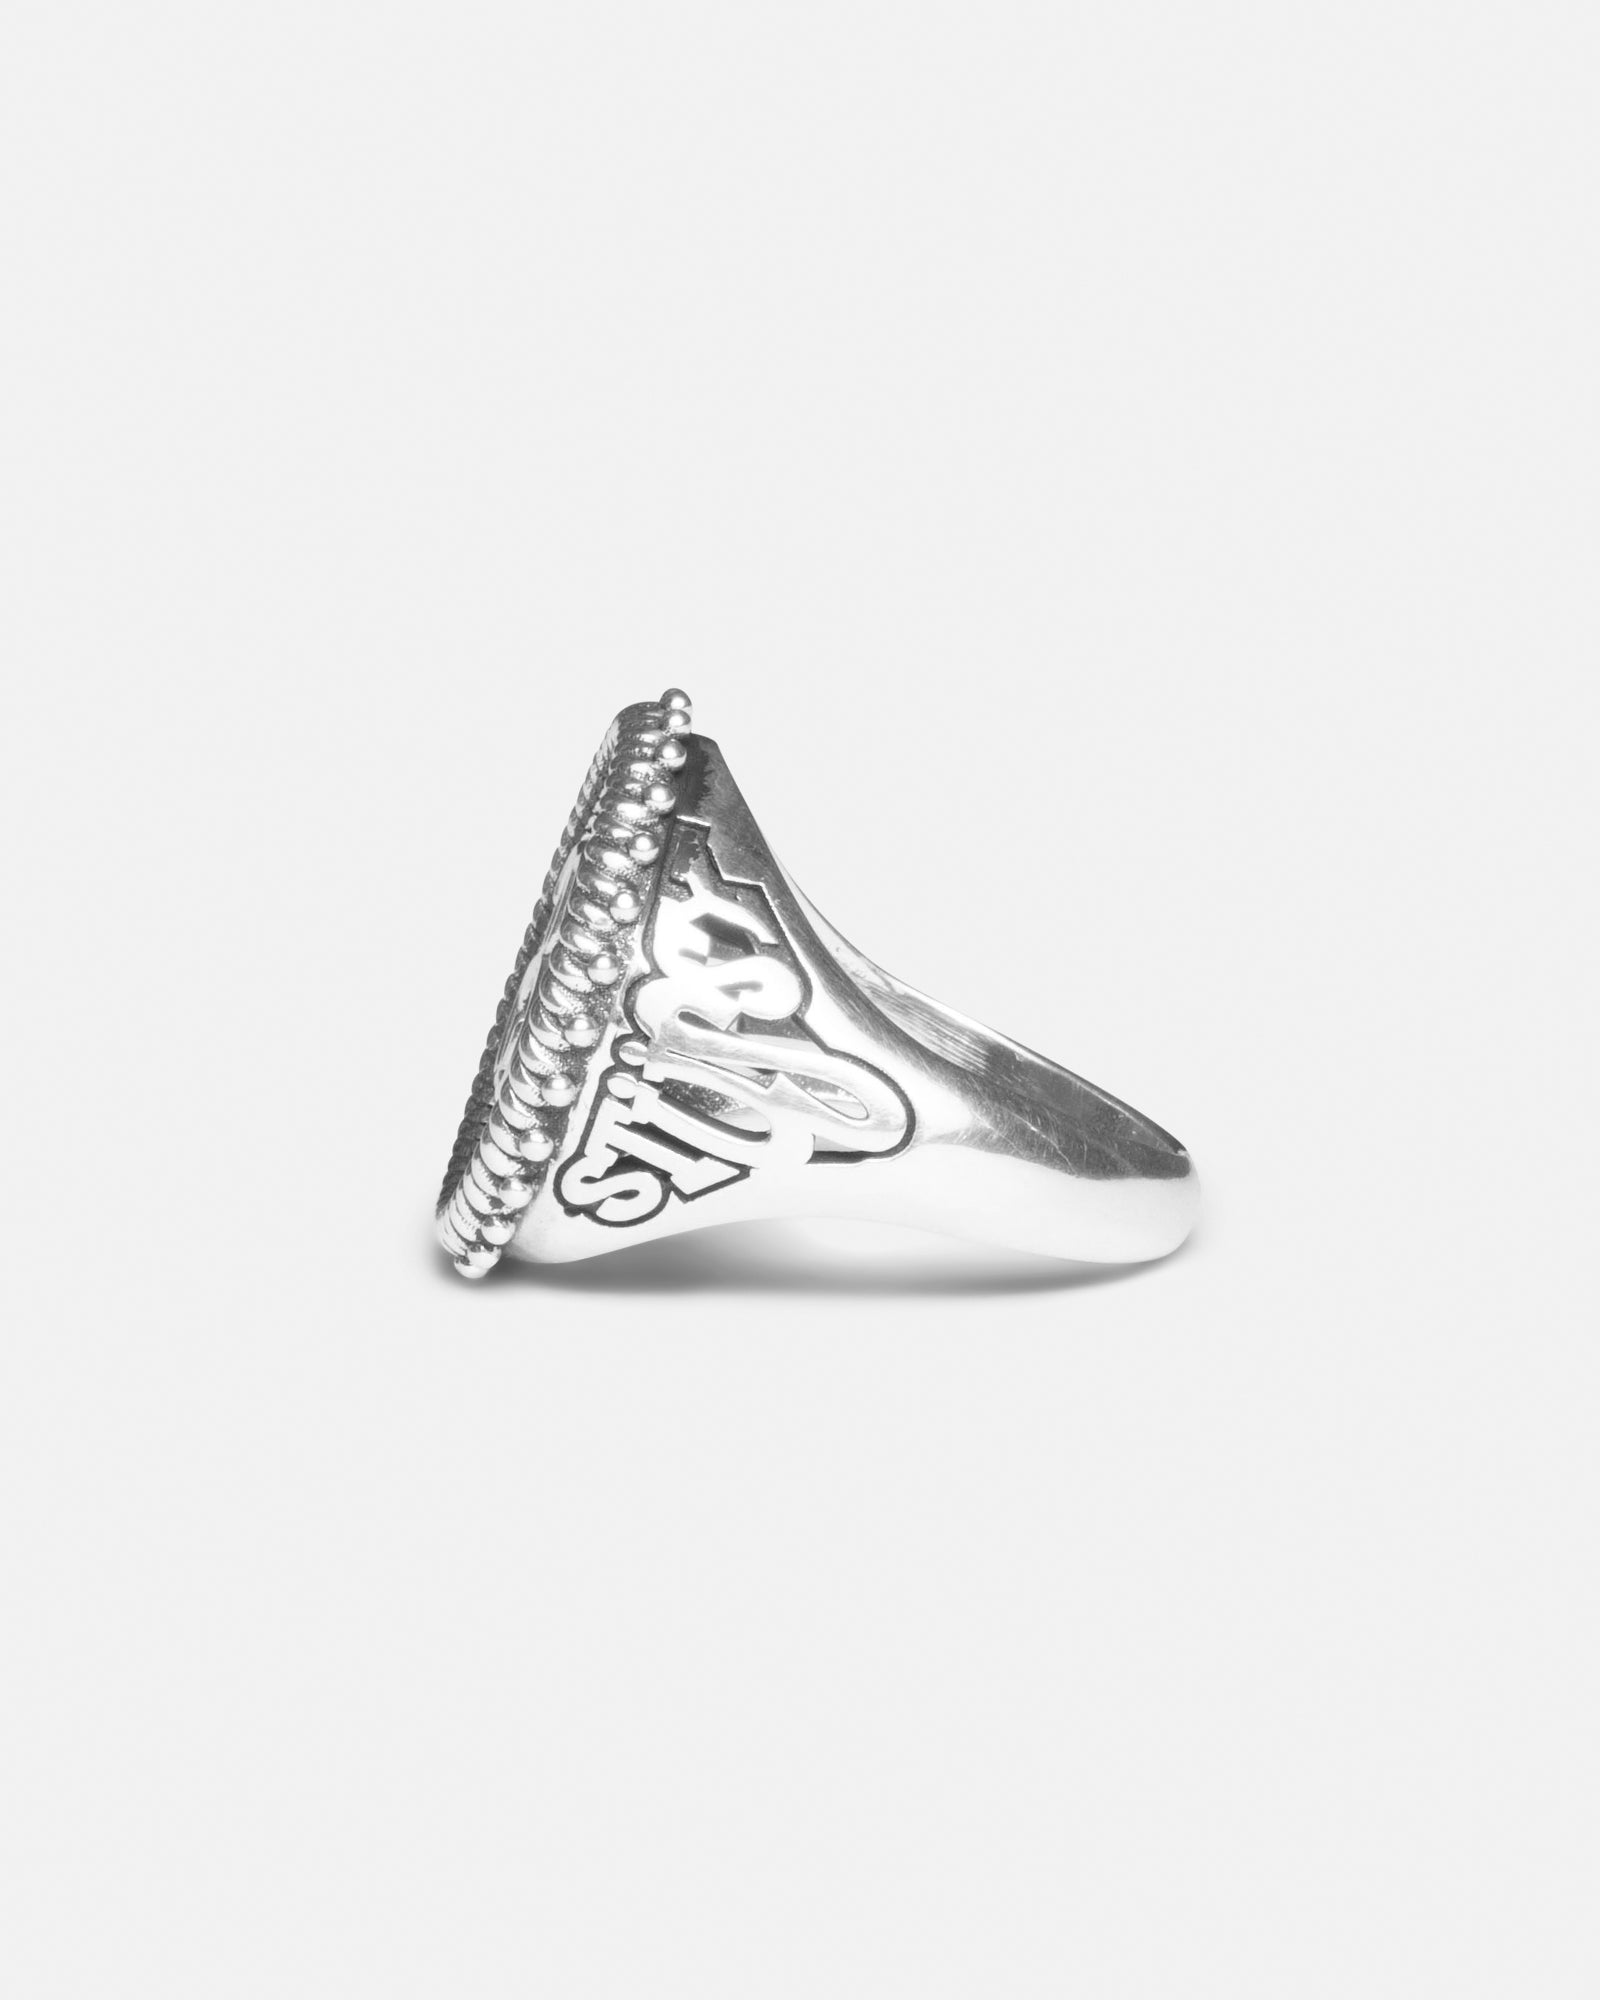 12 STUSSY SOVEREIGN RING STERLING SILVER正規取扱店購入